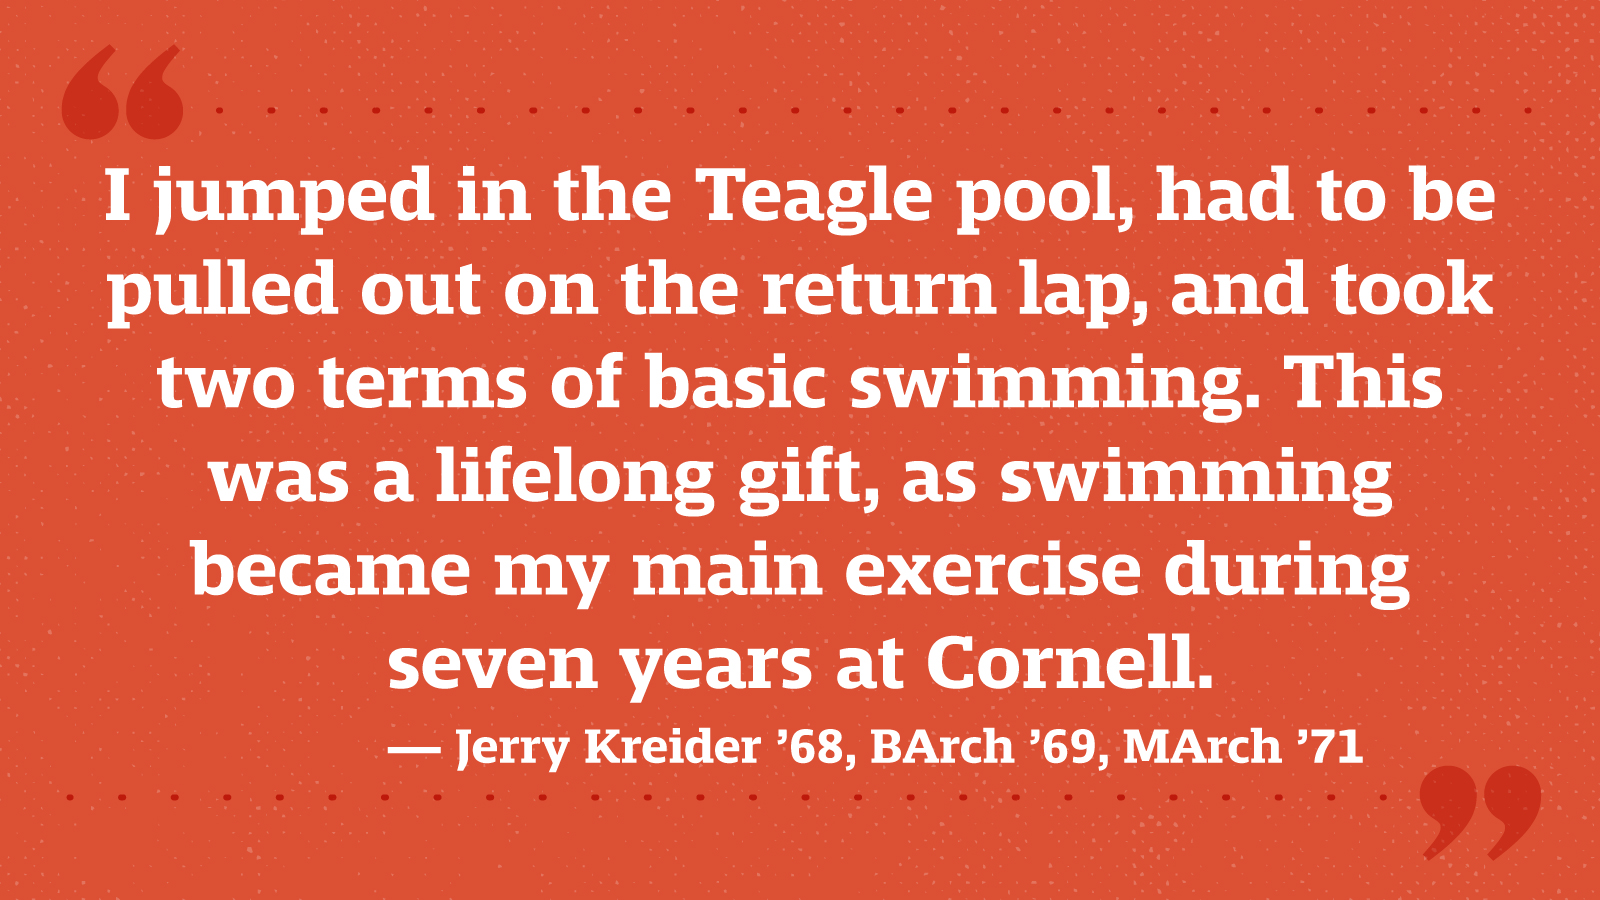 I jumped in the Teagle pool, had to be pulled out on the return lap, and took two terms of basic swimming. This was a lifelong gift, as swimming became my main exercise during seven years at Cornell. — Jerry Kreider ’68, BArch ’69, MArch ’71